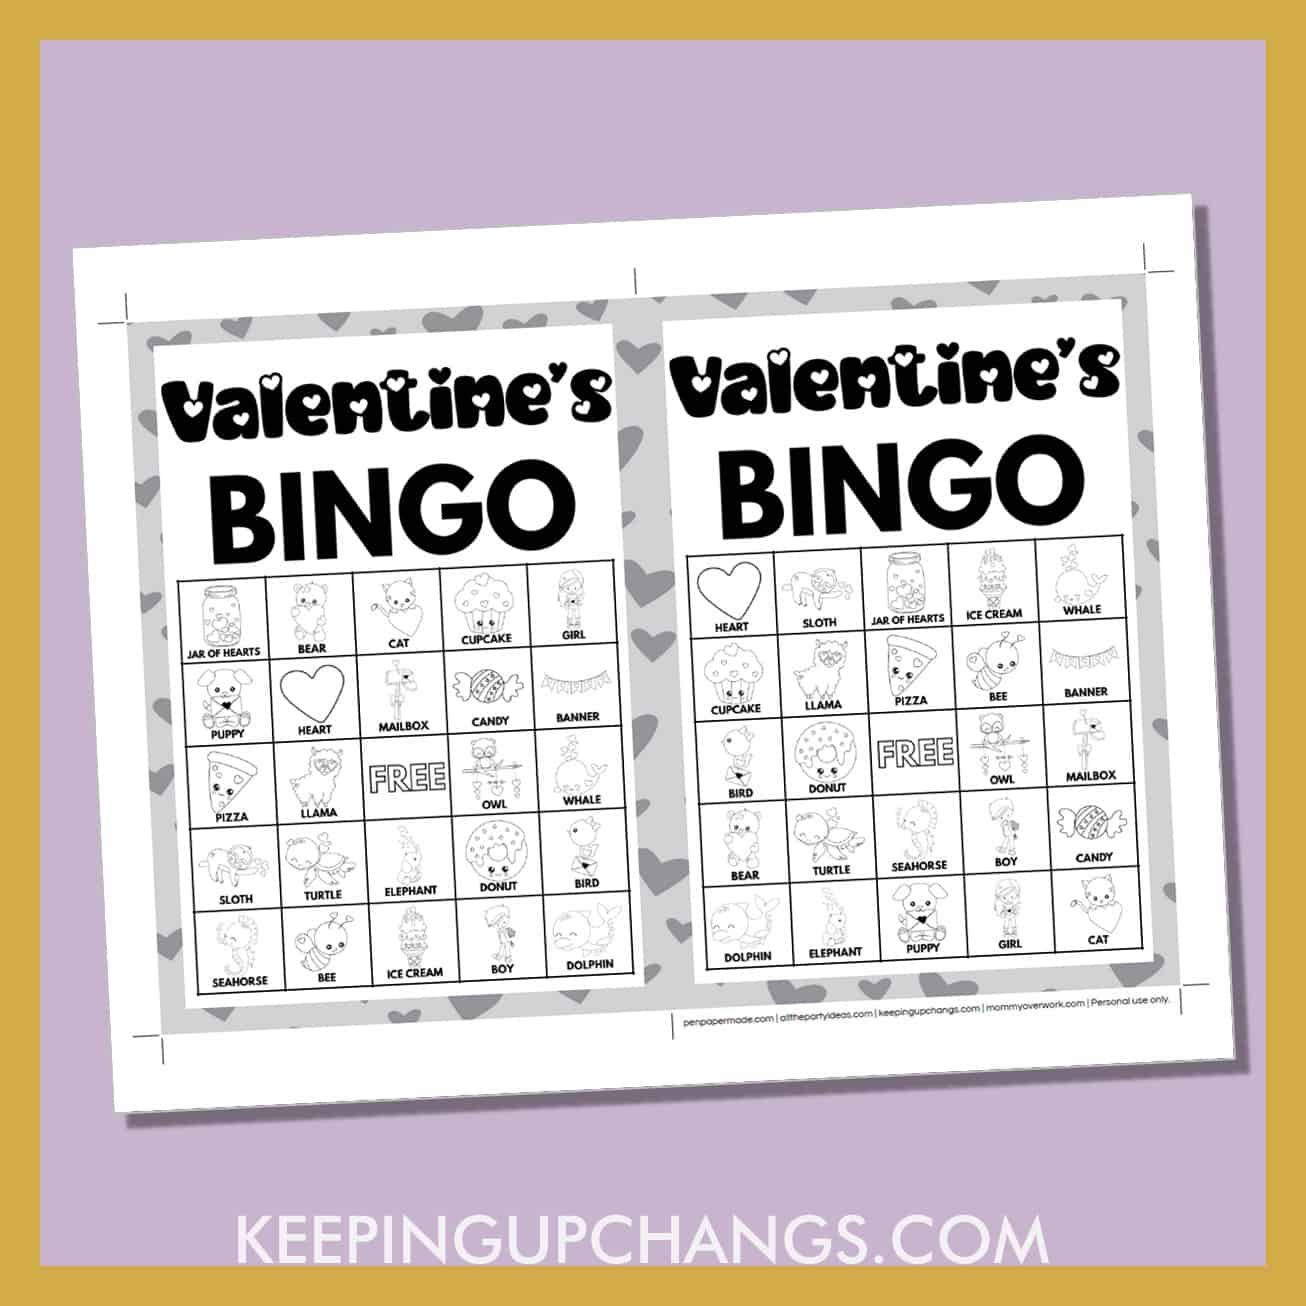 free valentine's bingo card 5x5 5x7 black white coloring game boards with images and text words.